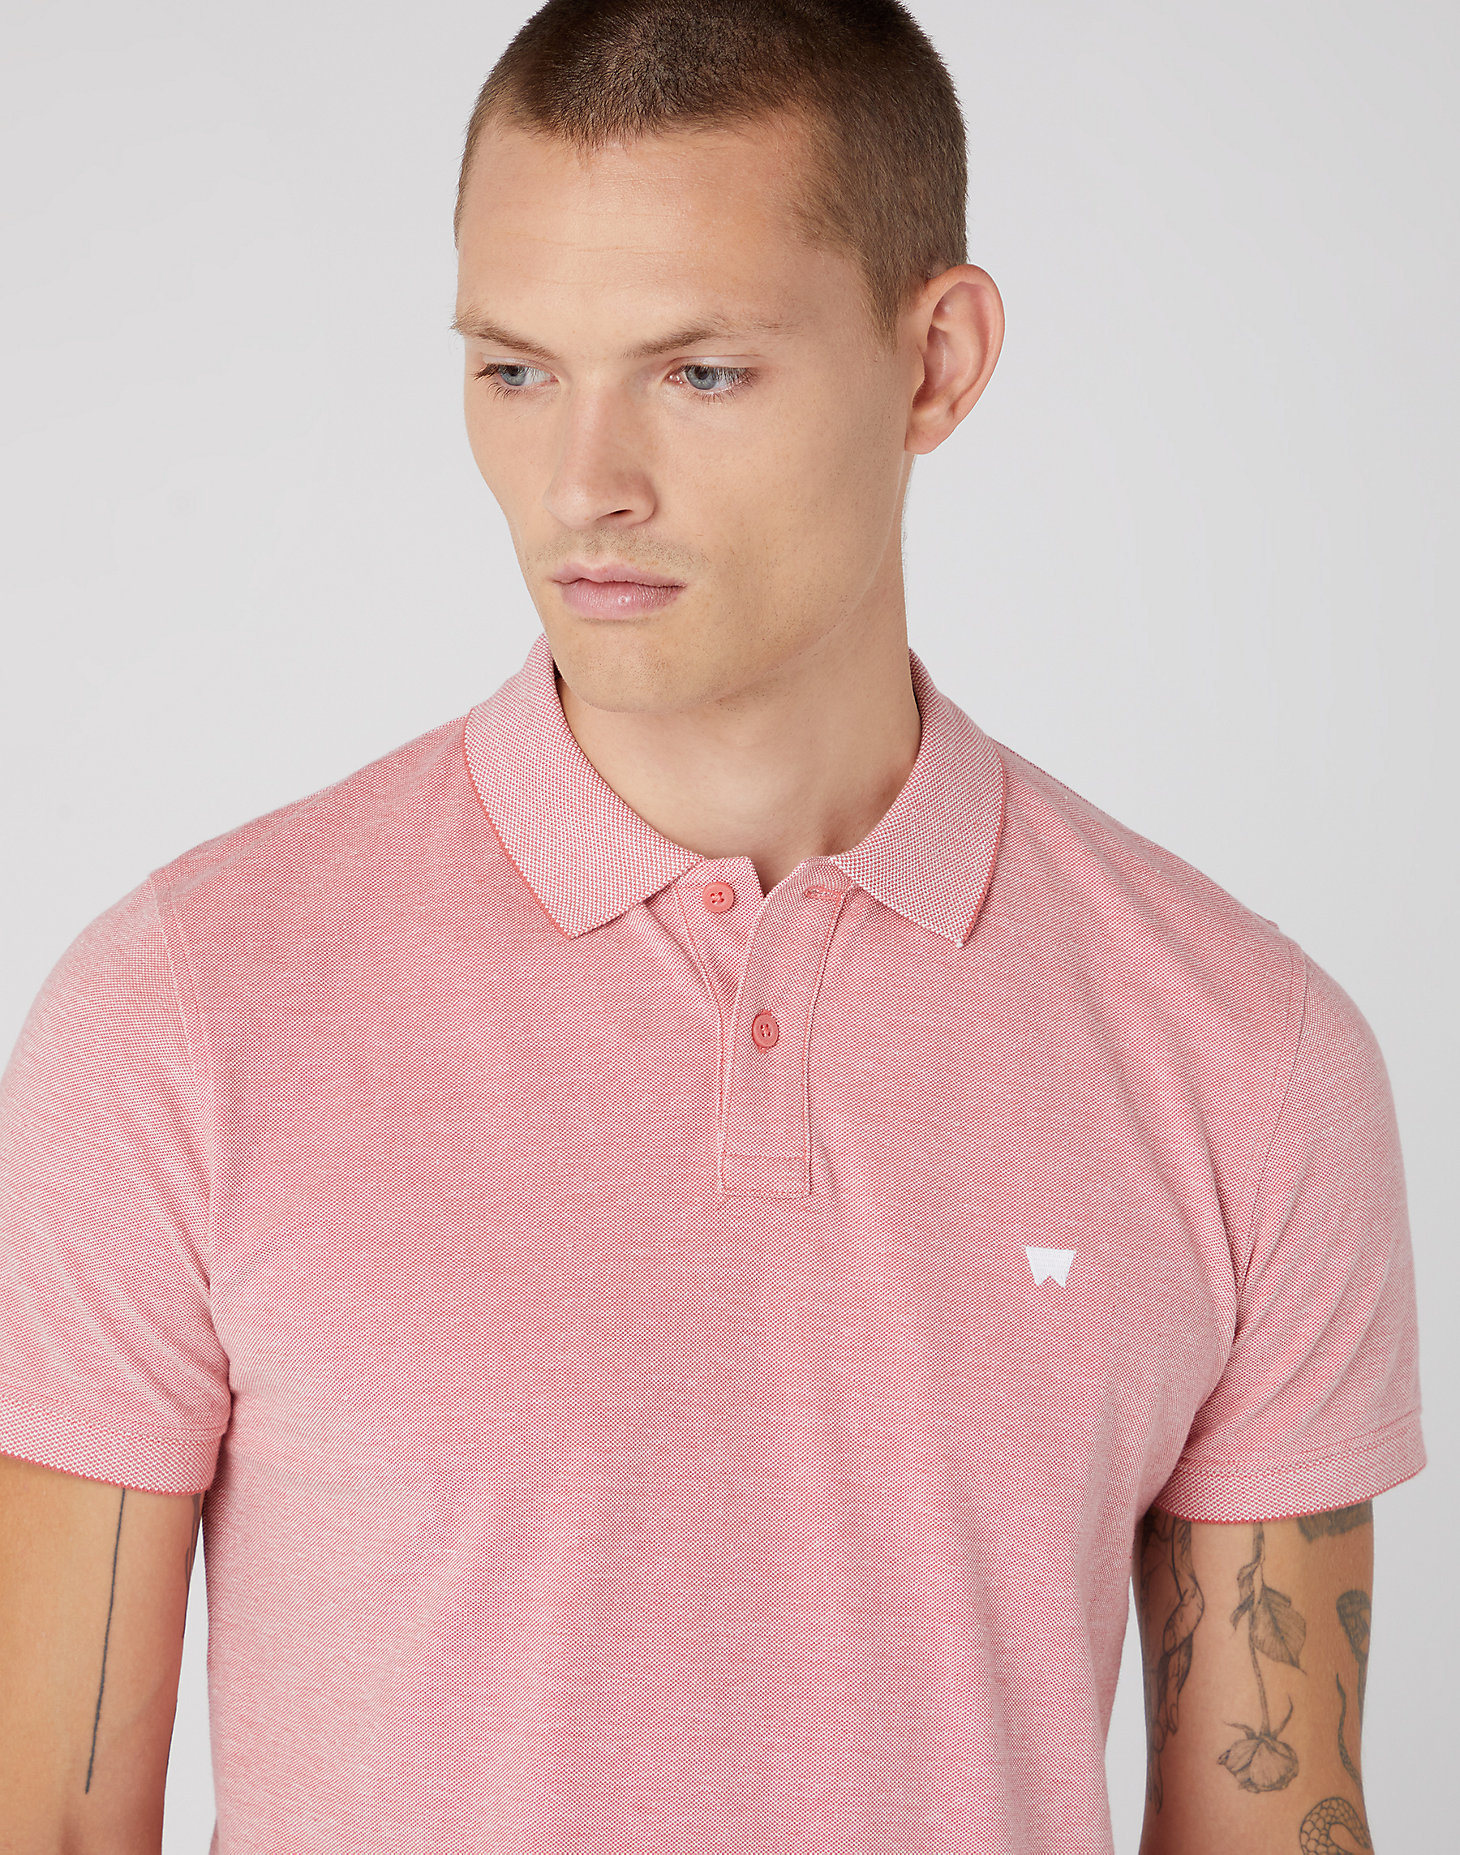 Refined Polo Shirt in Faded Rose alternative view 3